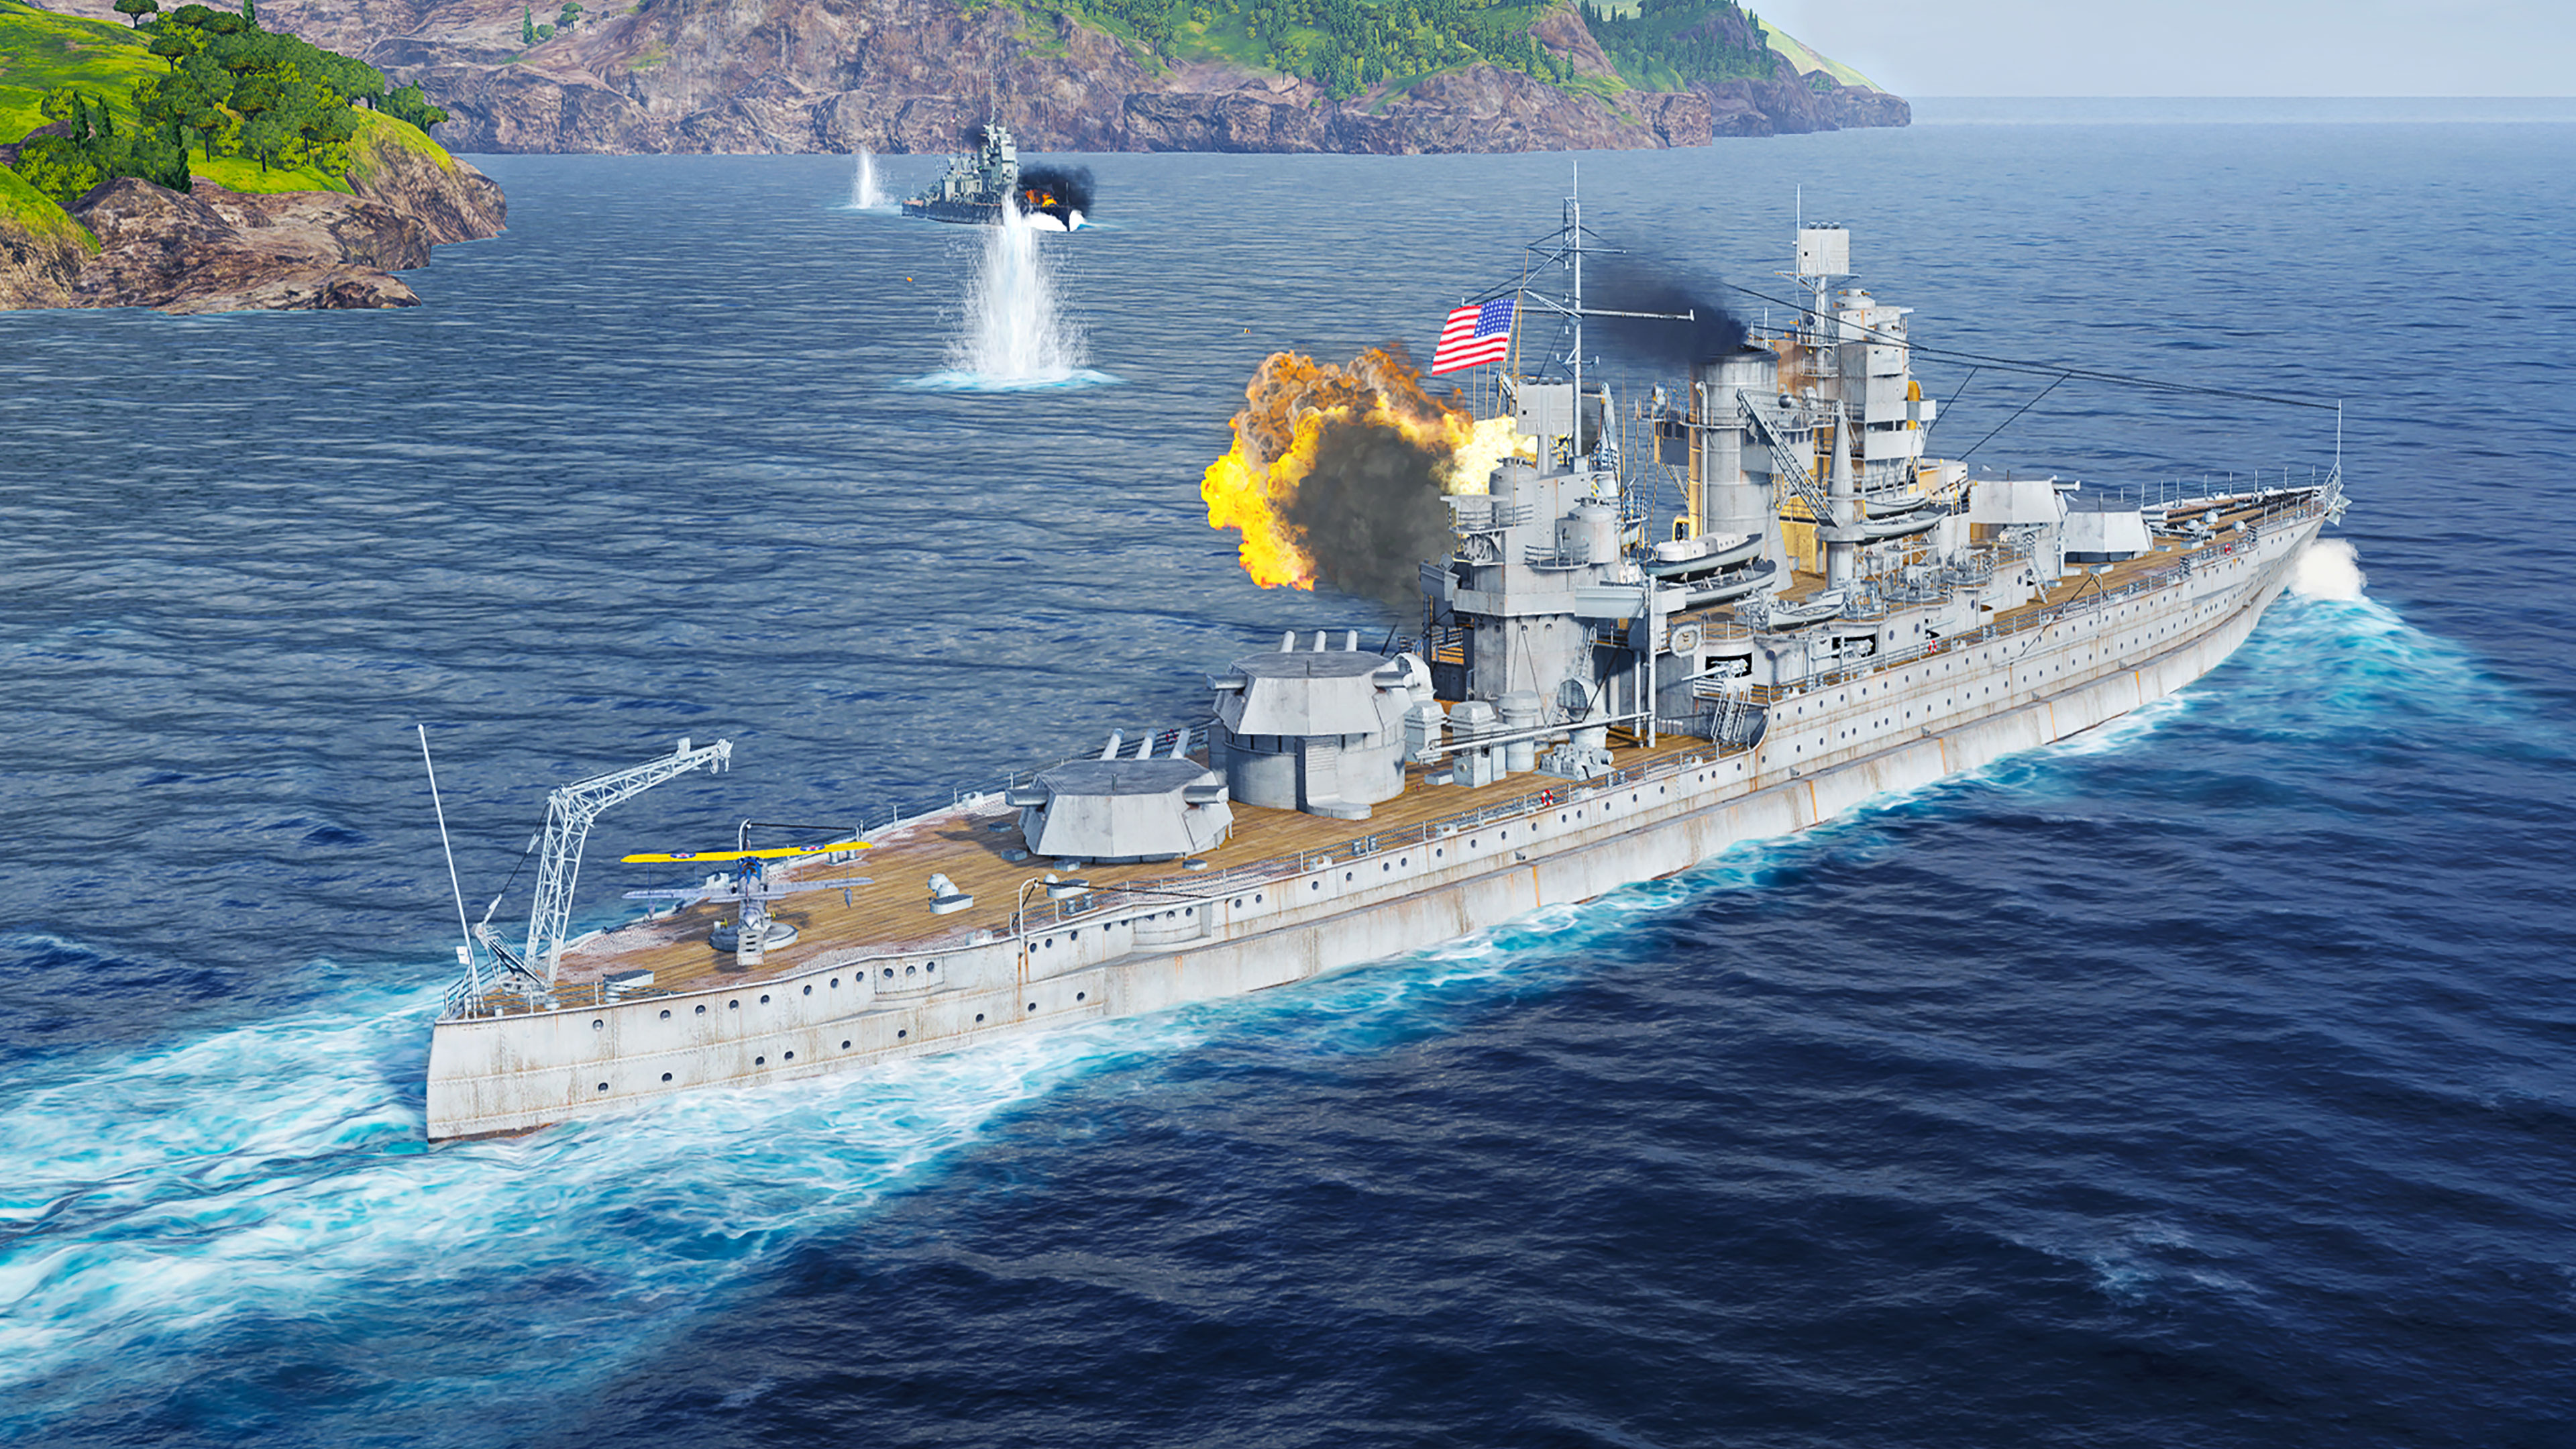 world of warships store